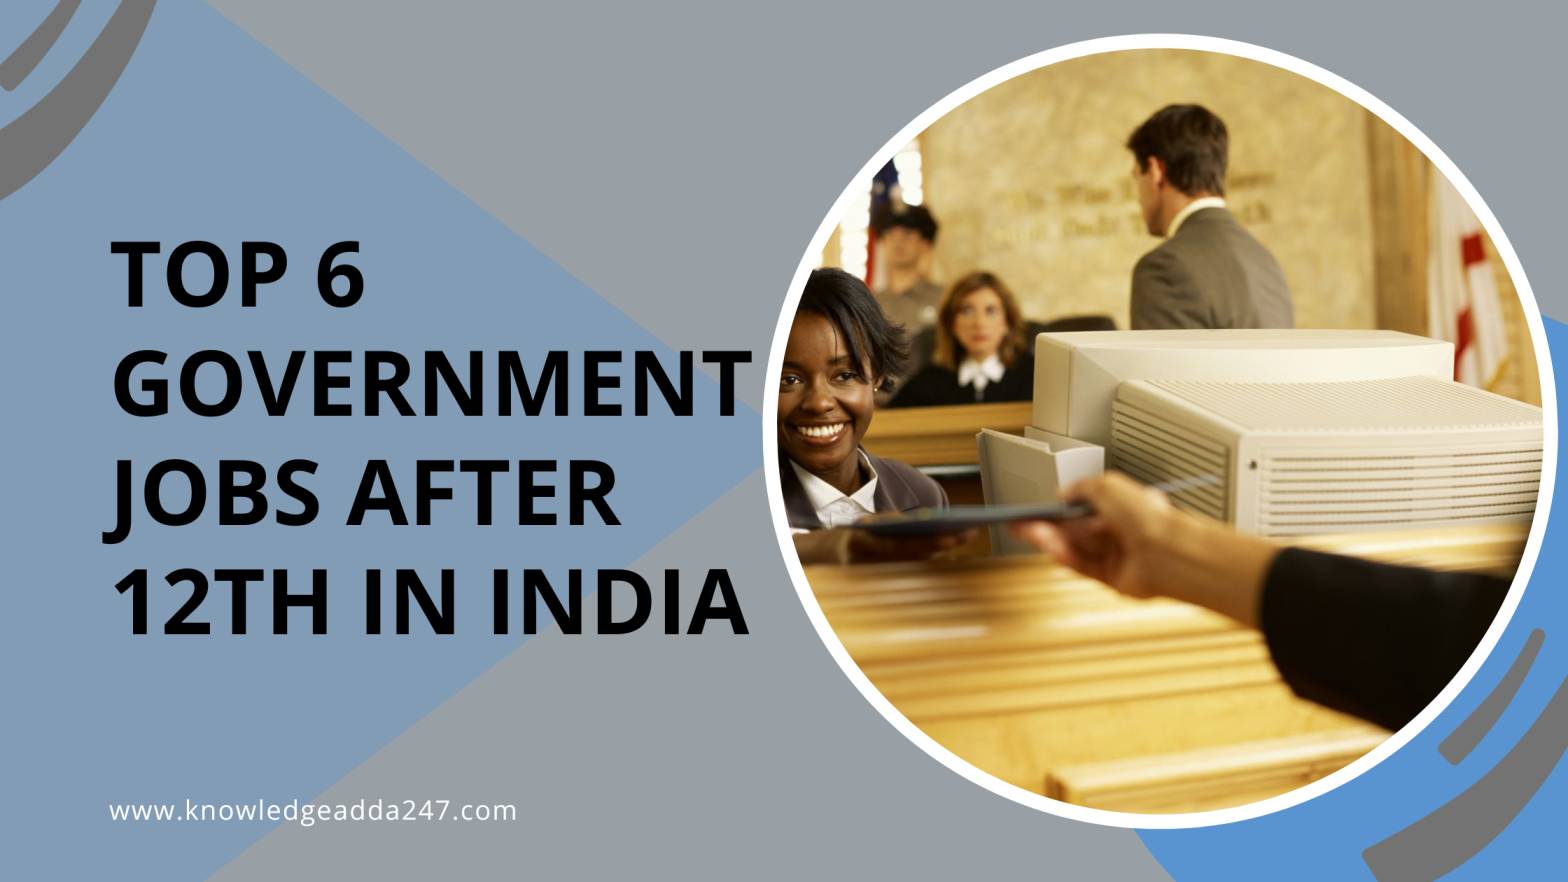 Top 6 Government Jobs after 12th in India: Eligibility, Salary, Exam Pattern, Syllabus, Job Profile!